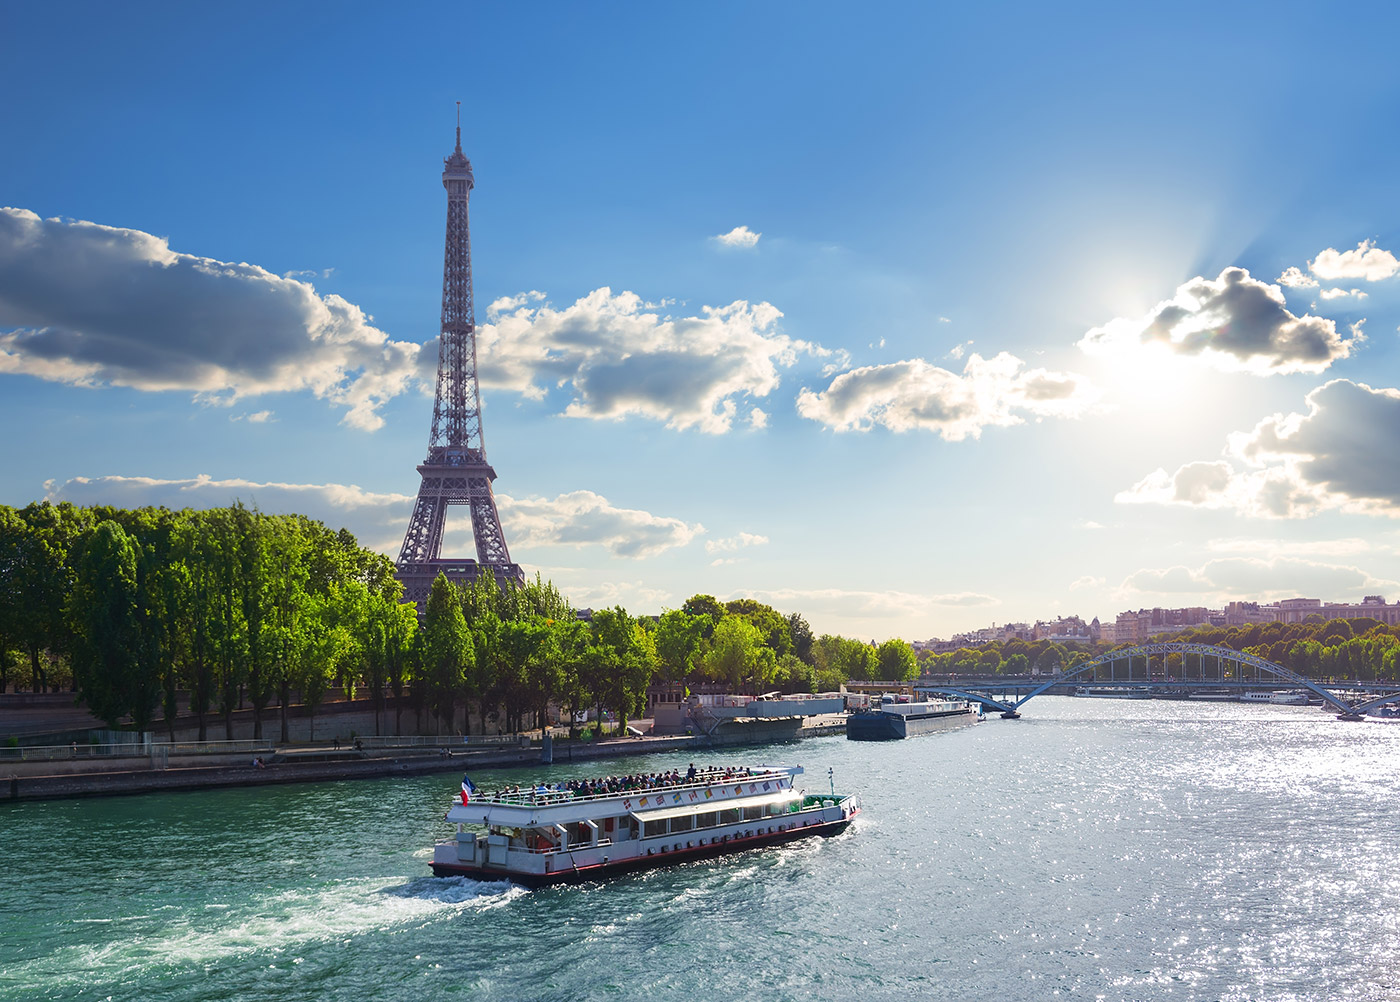 Paris, France - Eiffel Tower and Themes River